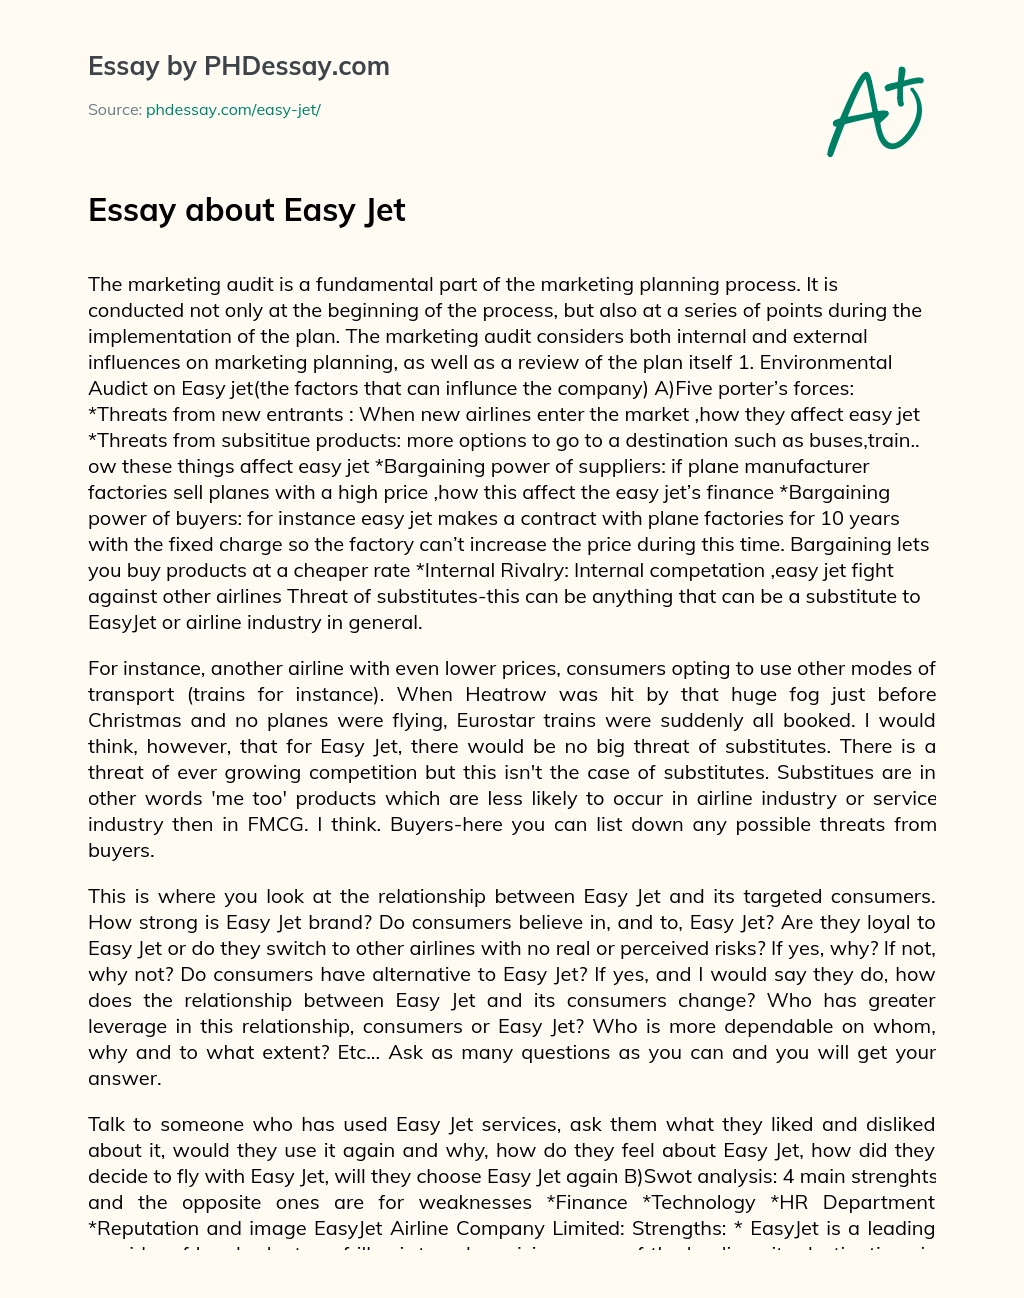 Essay about Easy Jet essay